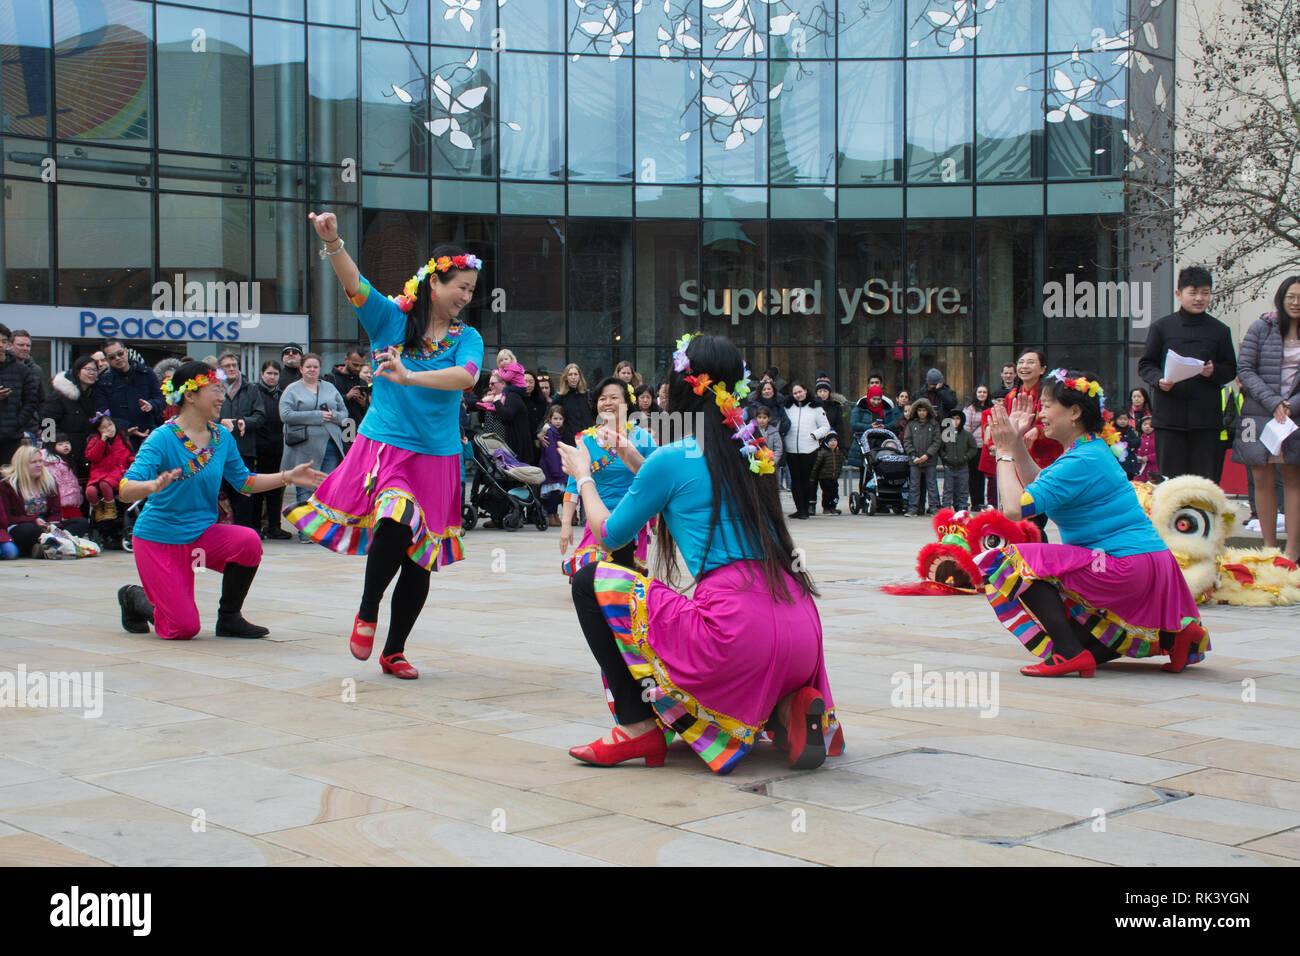 Woking, Surrey, UK. 9th February, 2019. Woking town centre celebrated the Chinese New Year of the Pig today with colourful parades and shows. A dance performance. Stock Photo